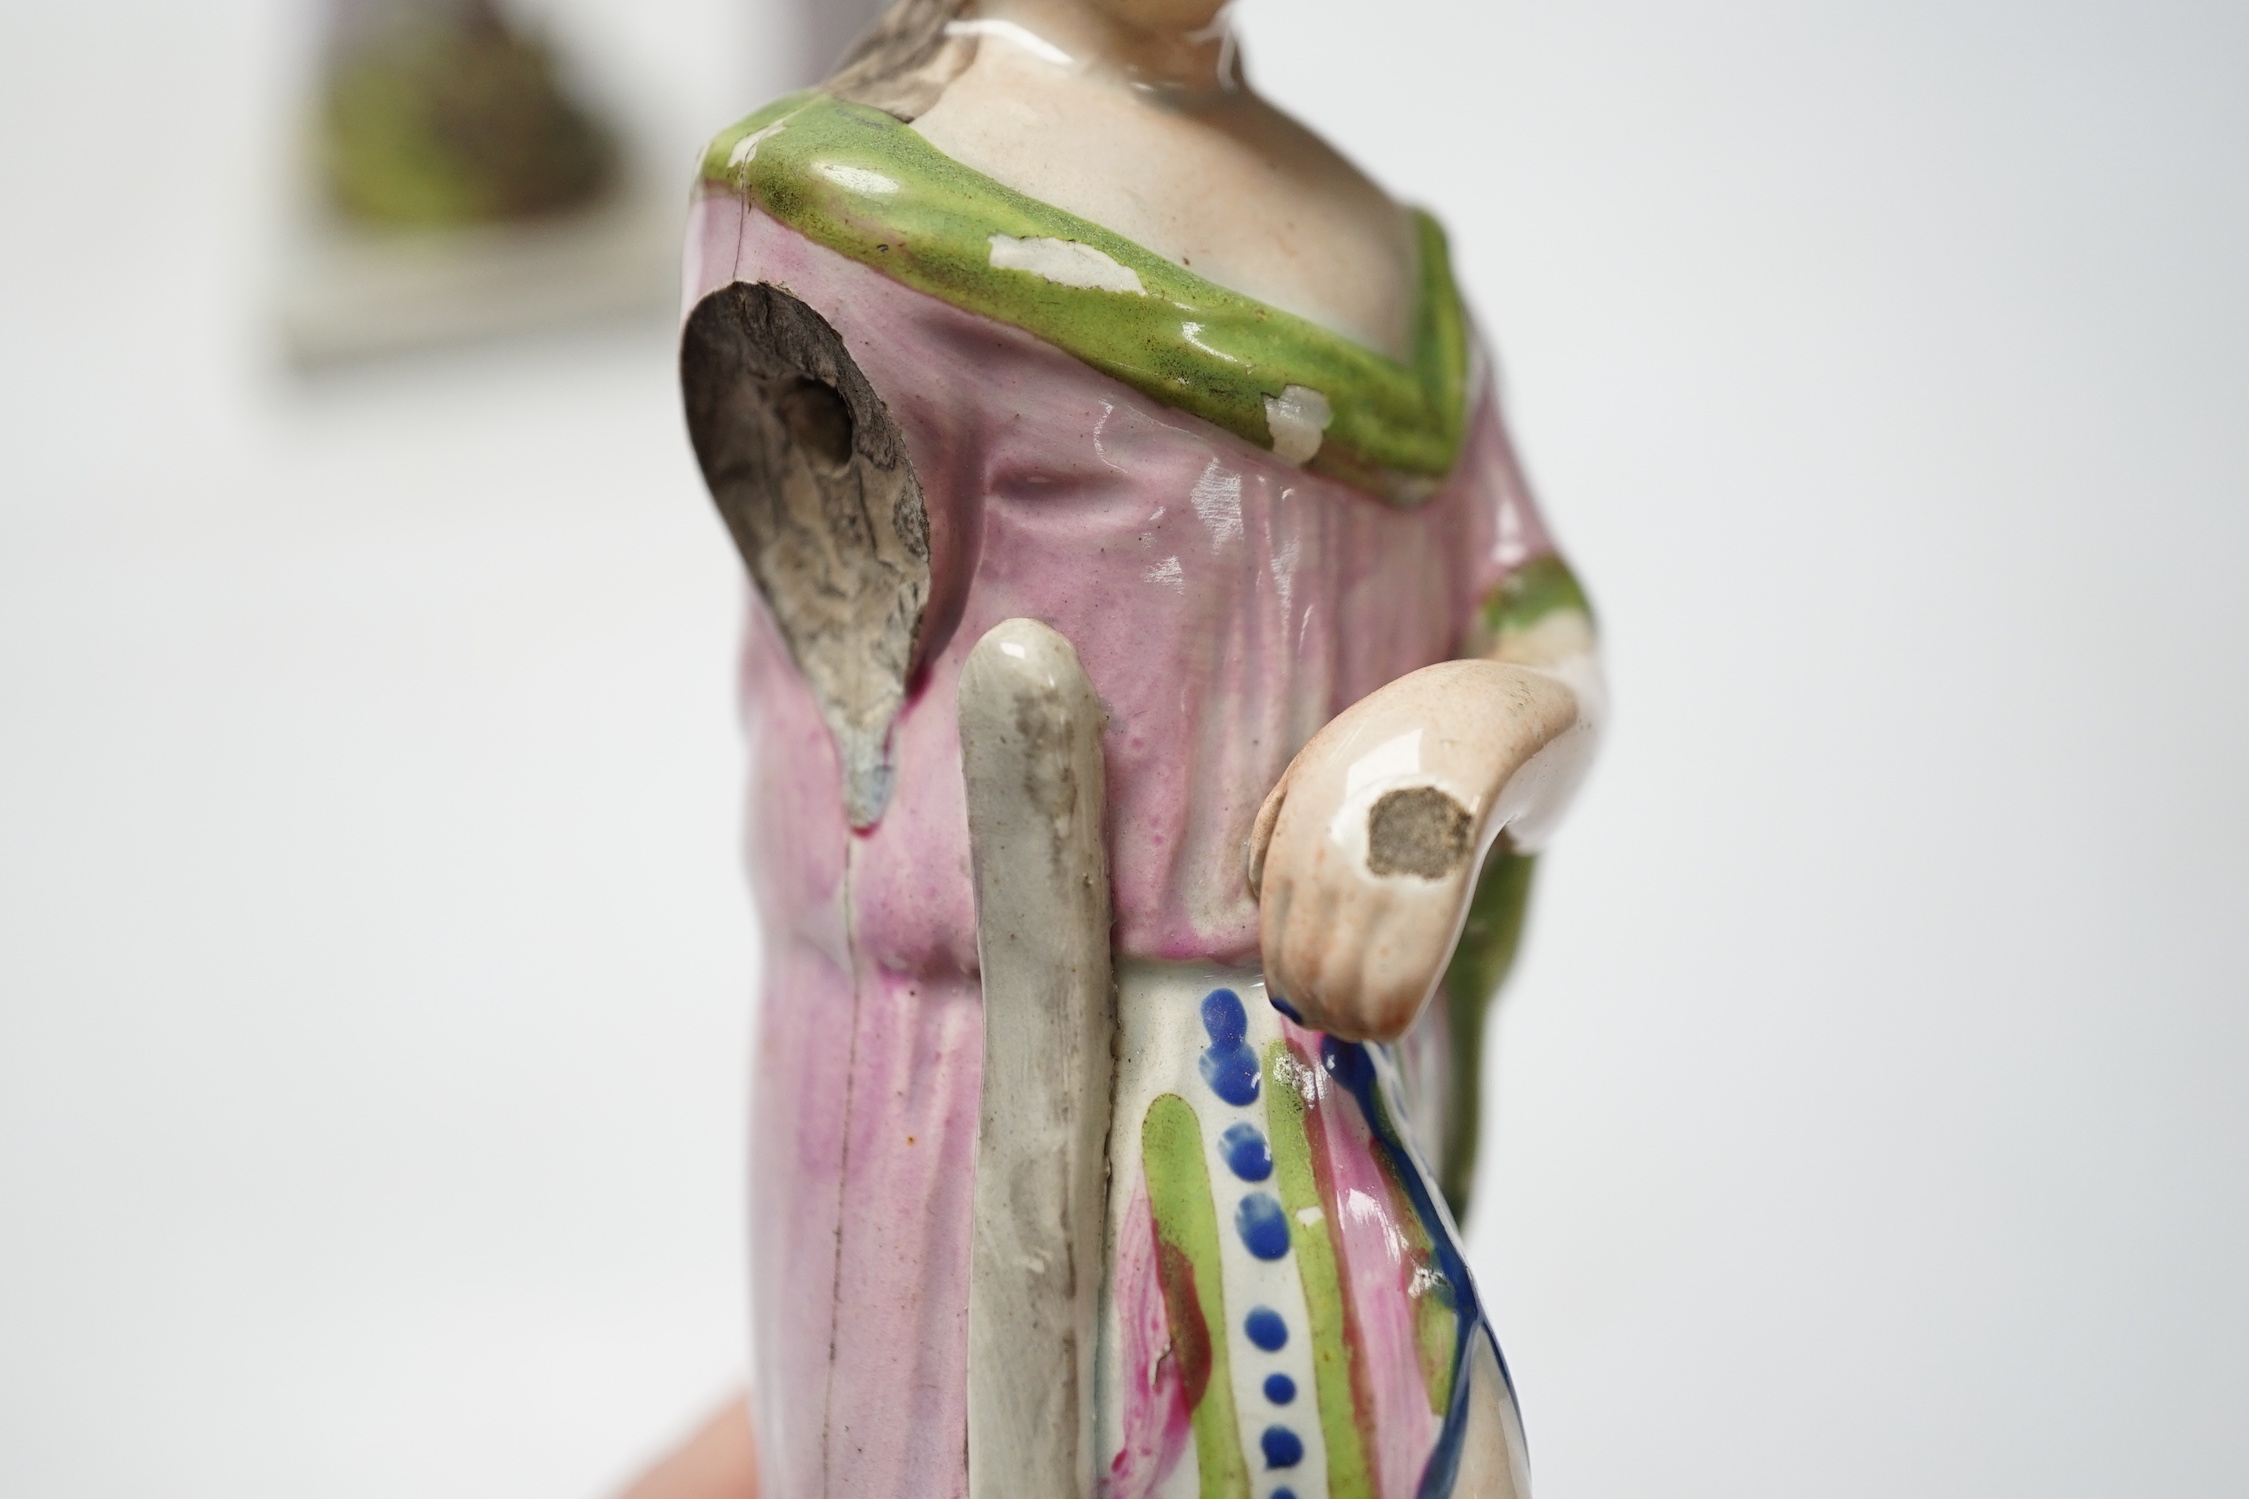 A set of three pearlware figures of Faith, Hope and Charity, c.1810, largest 21cm high